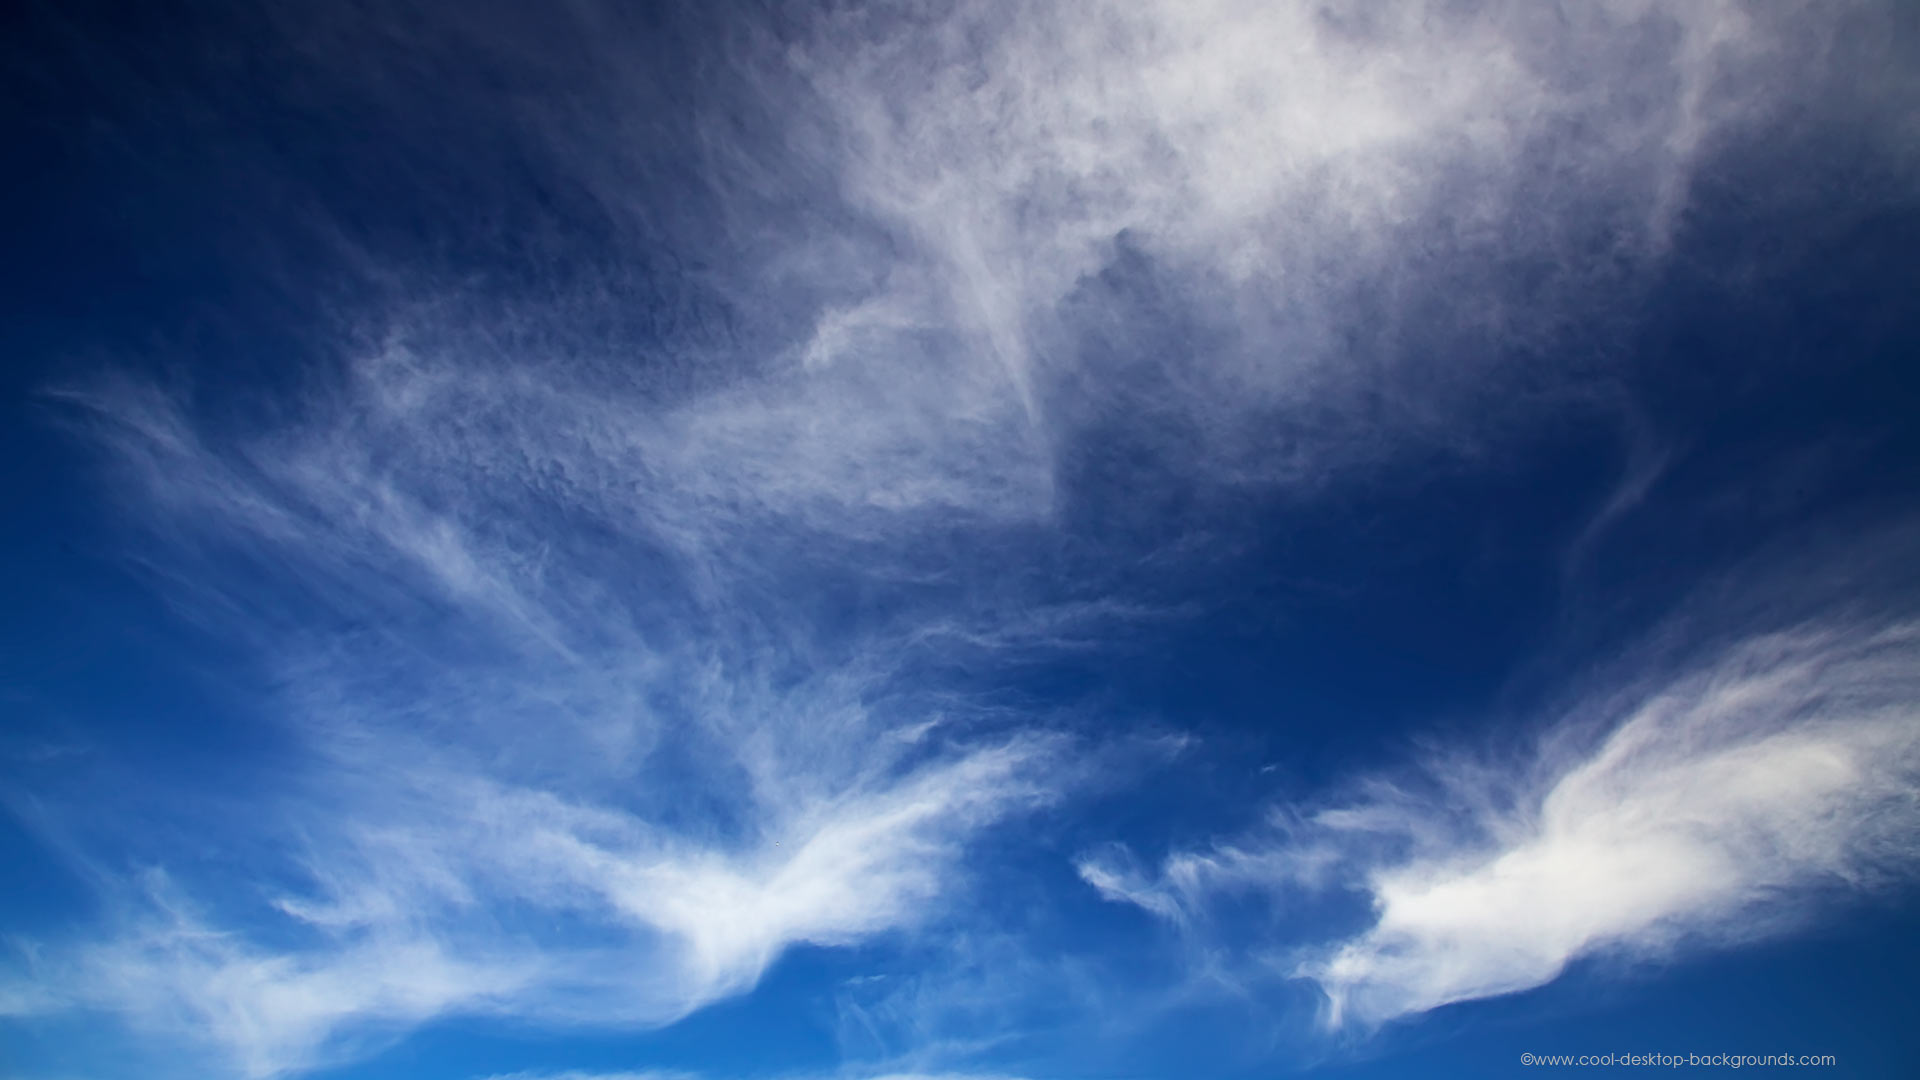 Desktop Backgrounds Cool Background Cirrus Sky Clouds wallpapers HD 1920x1080